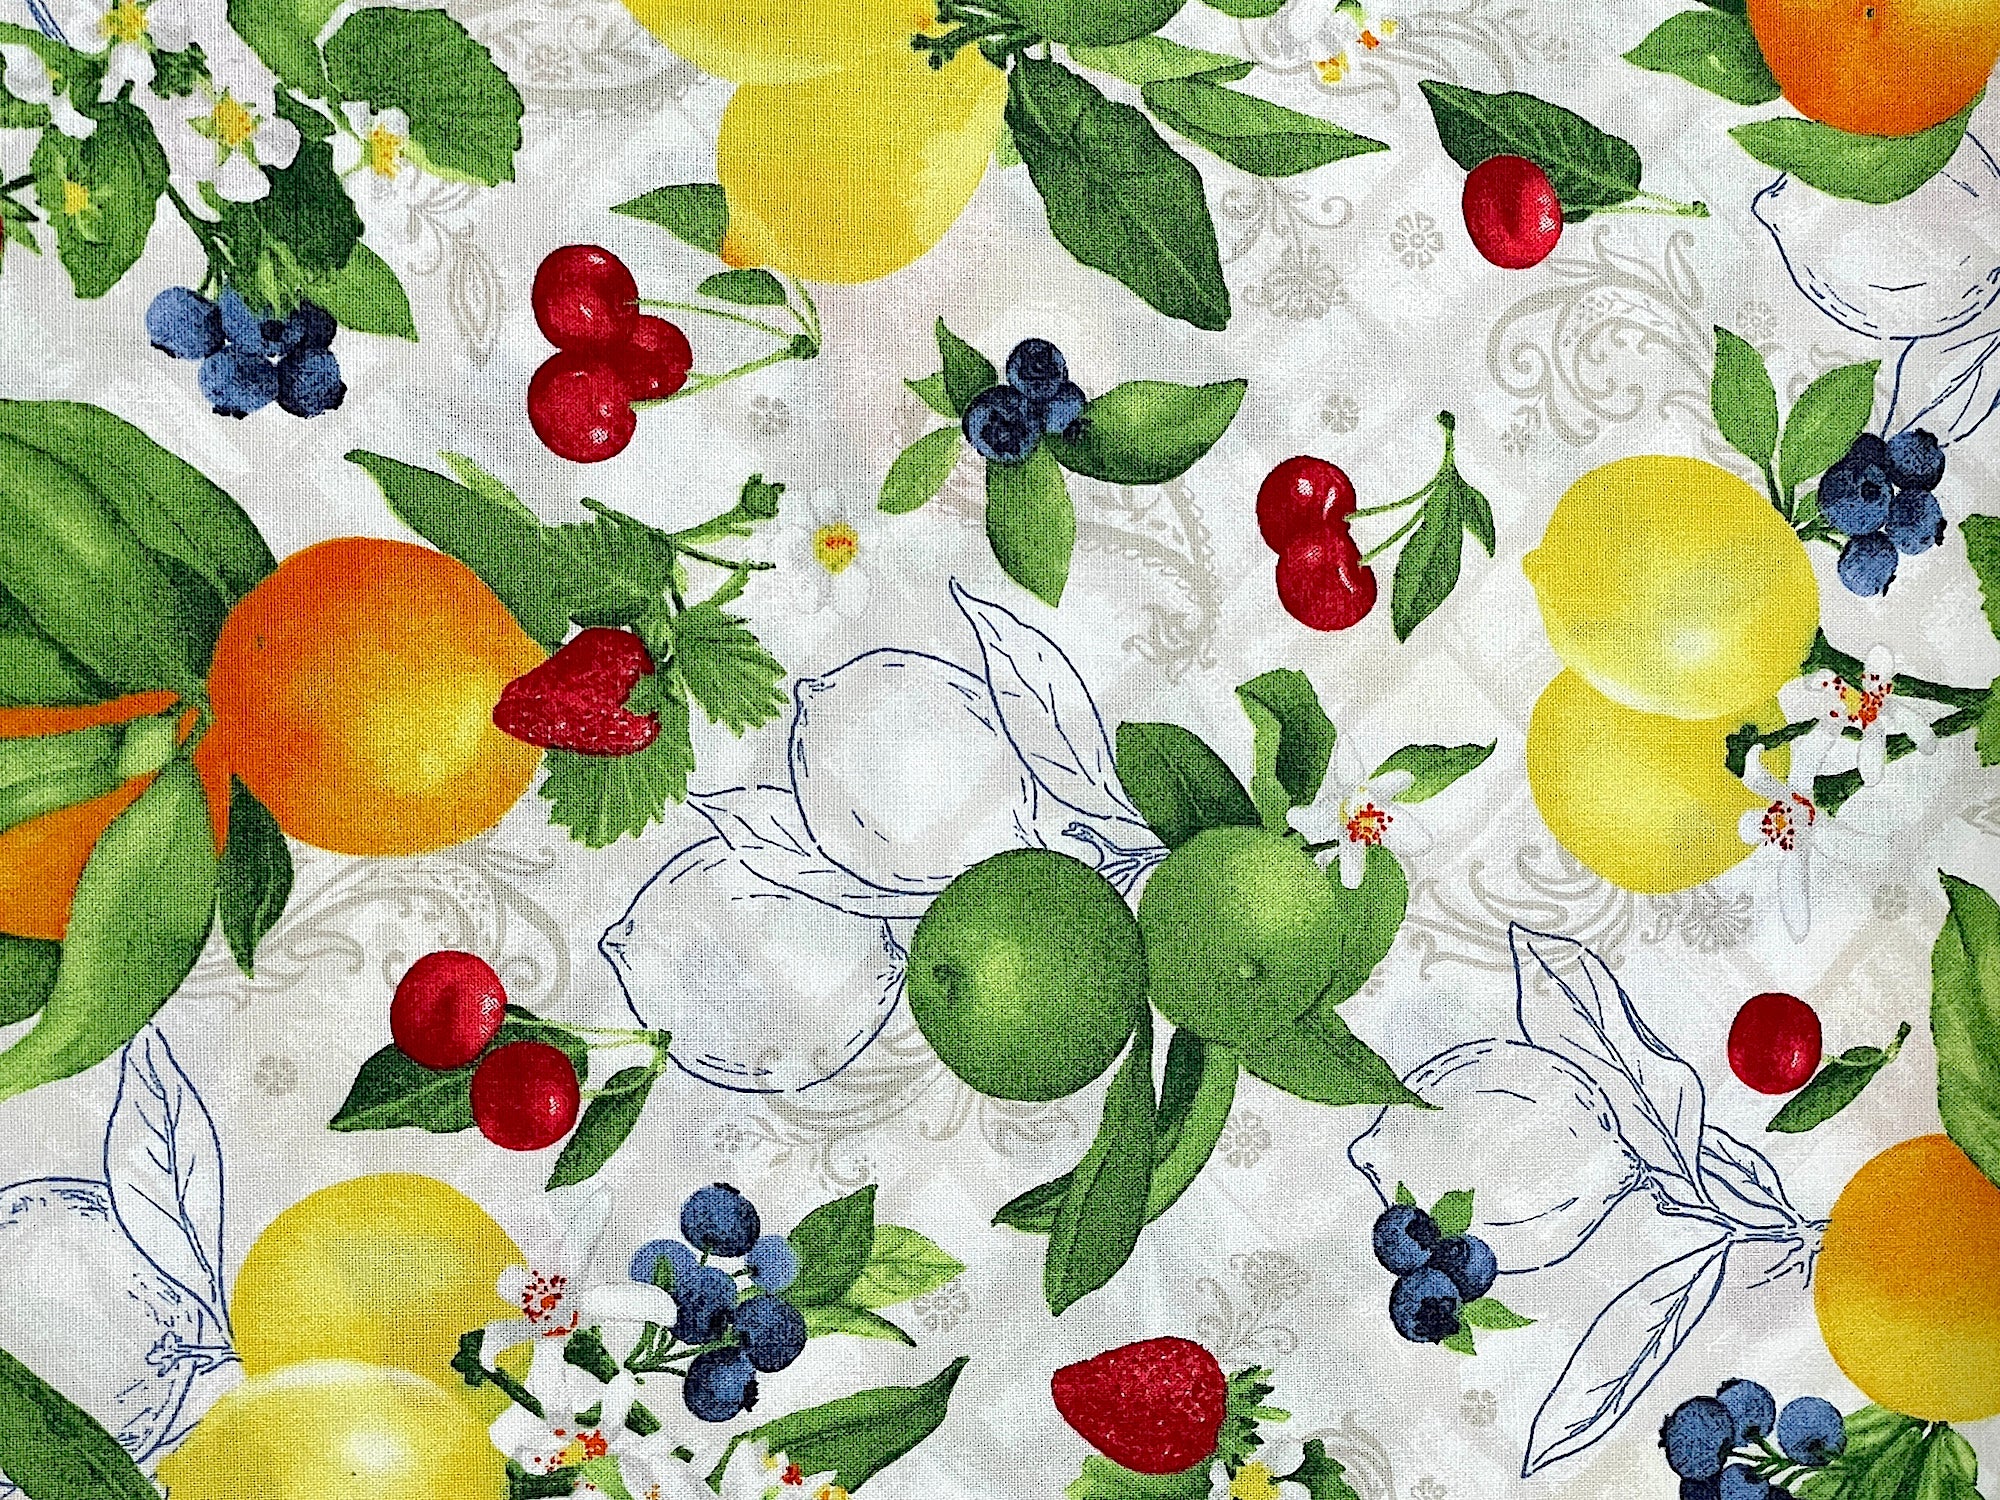 This fabric is part of the Ambrosia Farm collection.&nbsp; This fabric is covered with lemons, limes, oranges, cherries, blueberries and more.